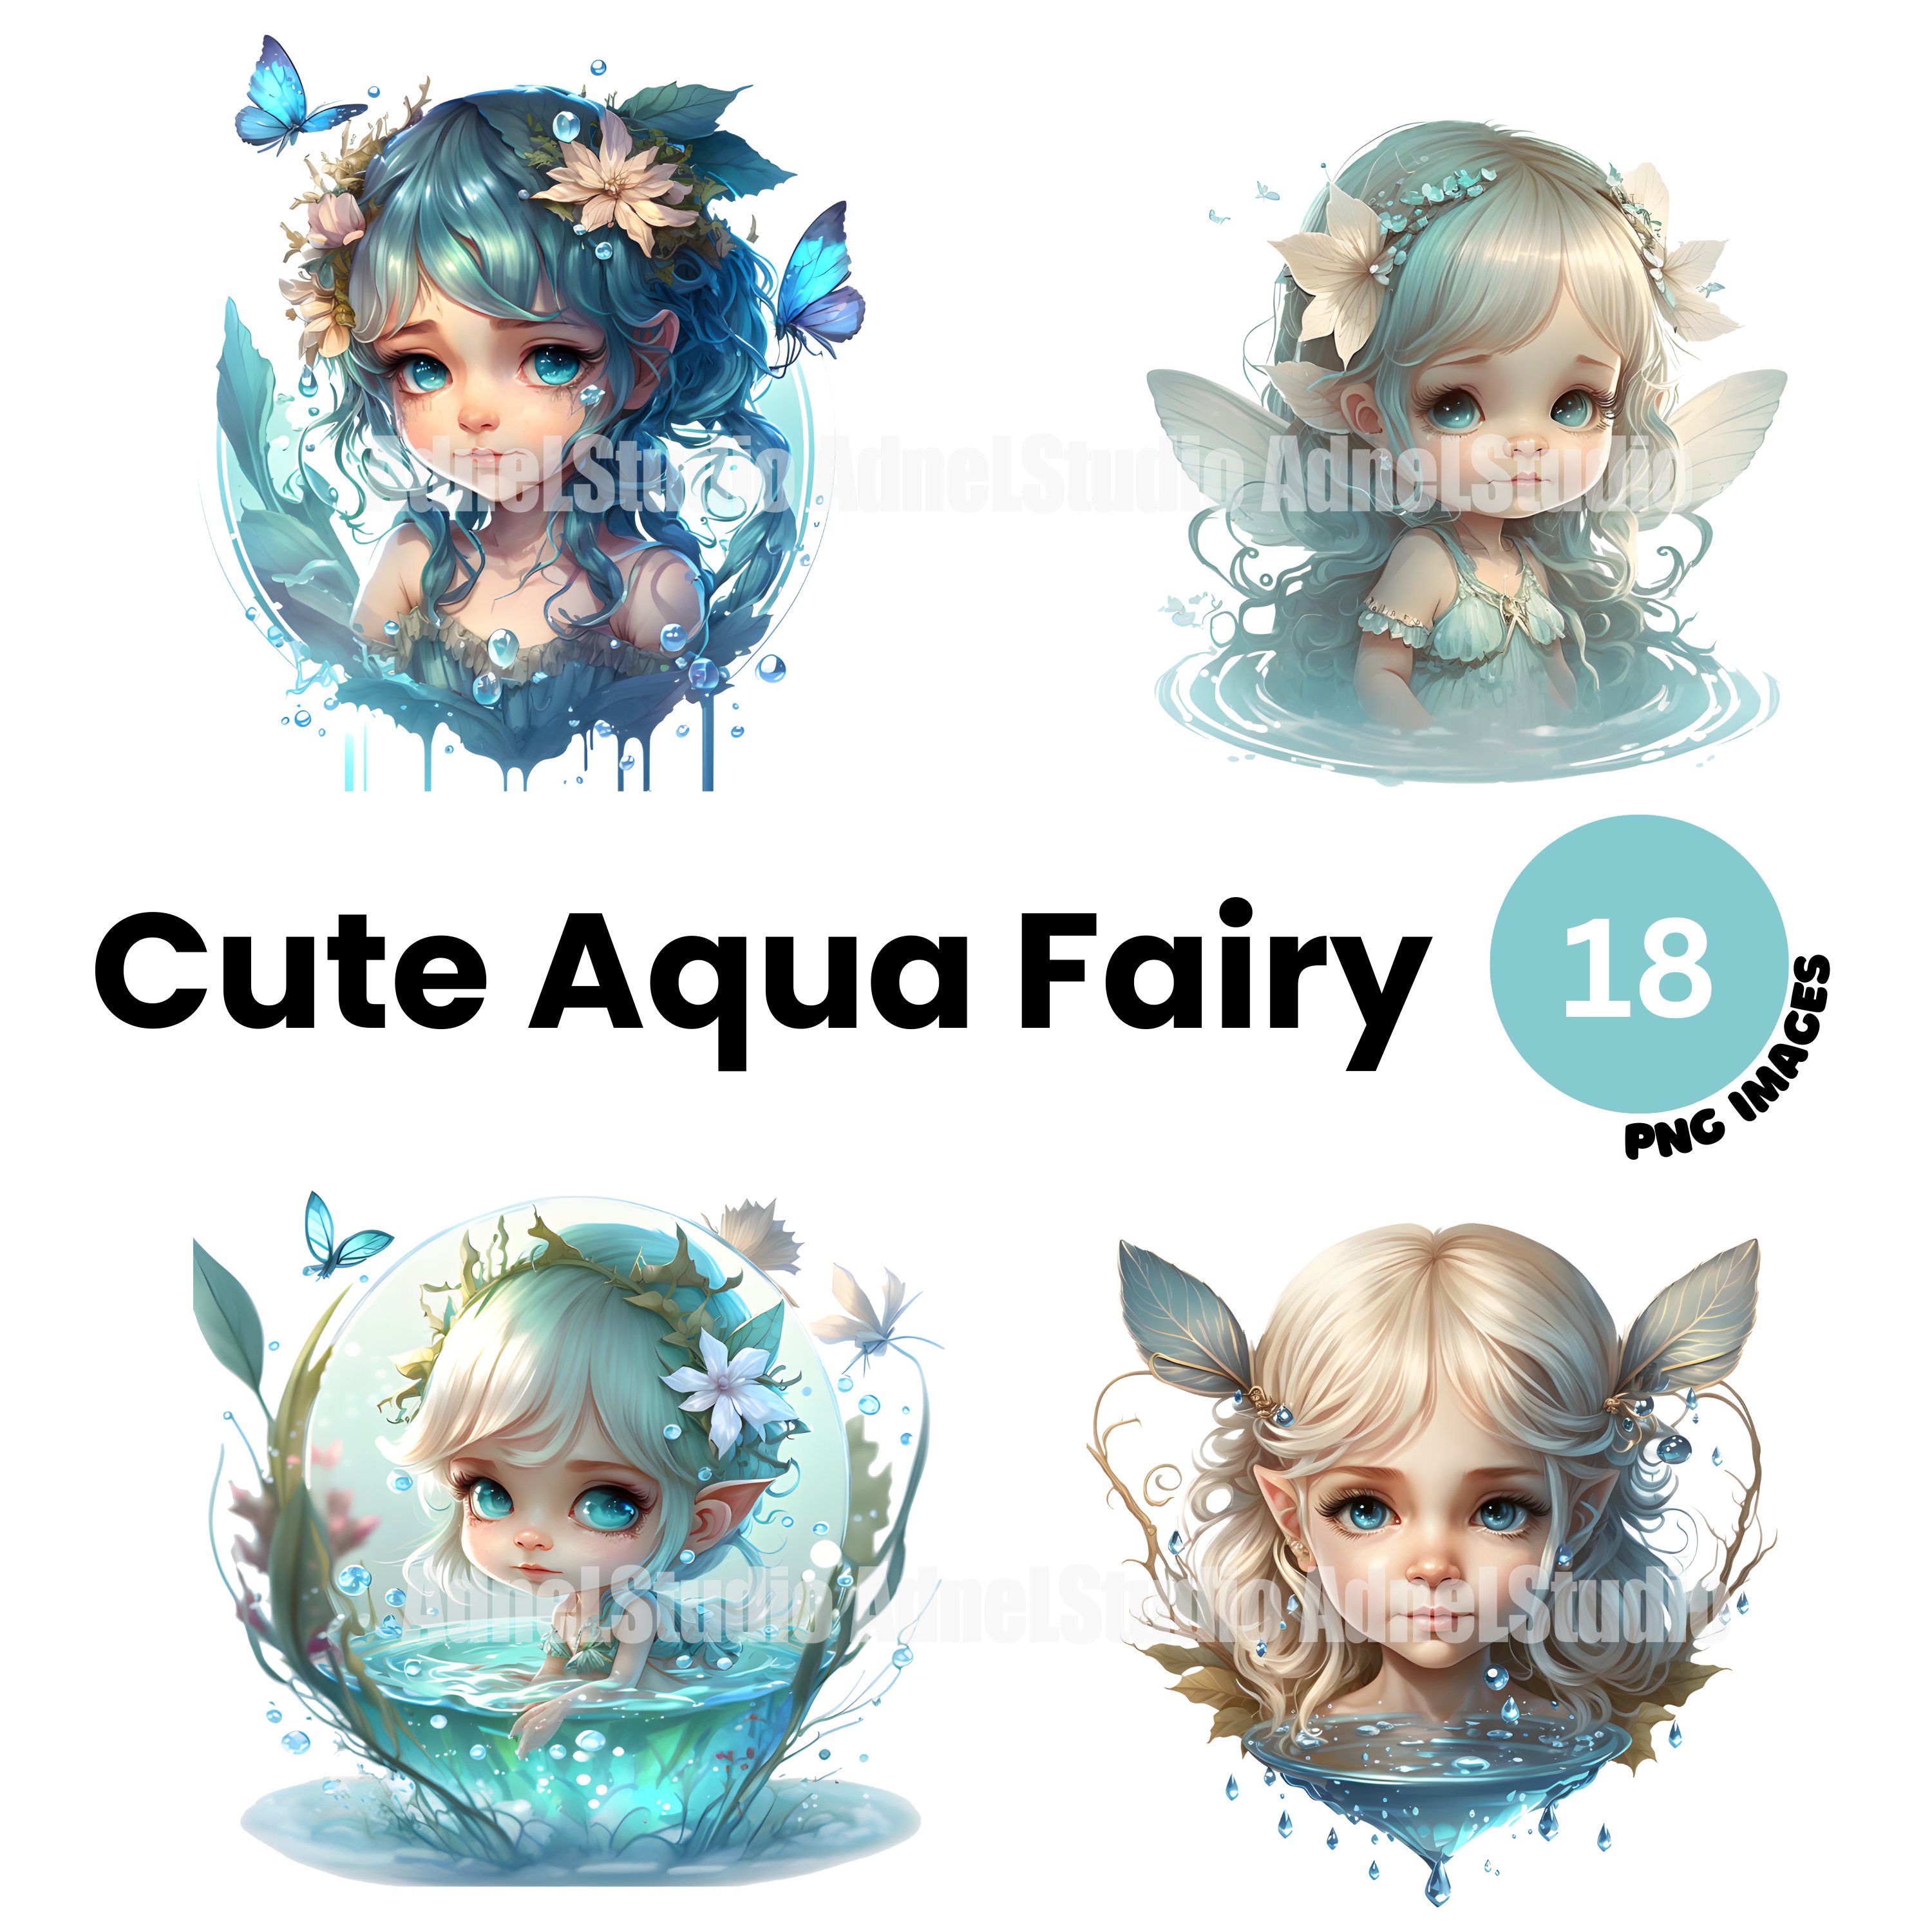 Cute Water Fairy Clipart 12 High Quality PNG Files, Digital Illustrations  Download, Cute Mermaid Fairy Digital Paper Craft 